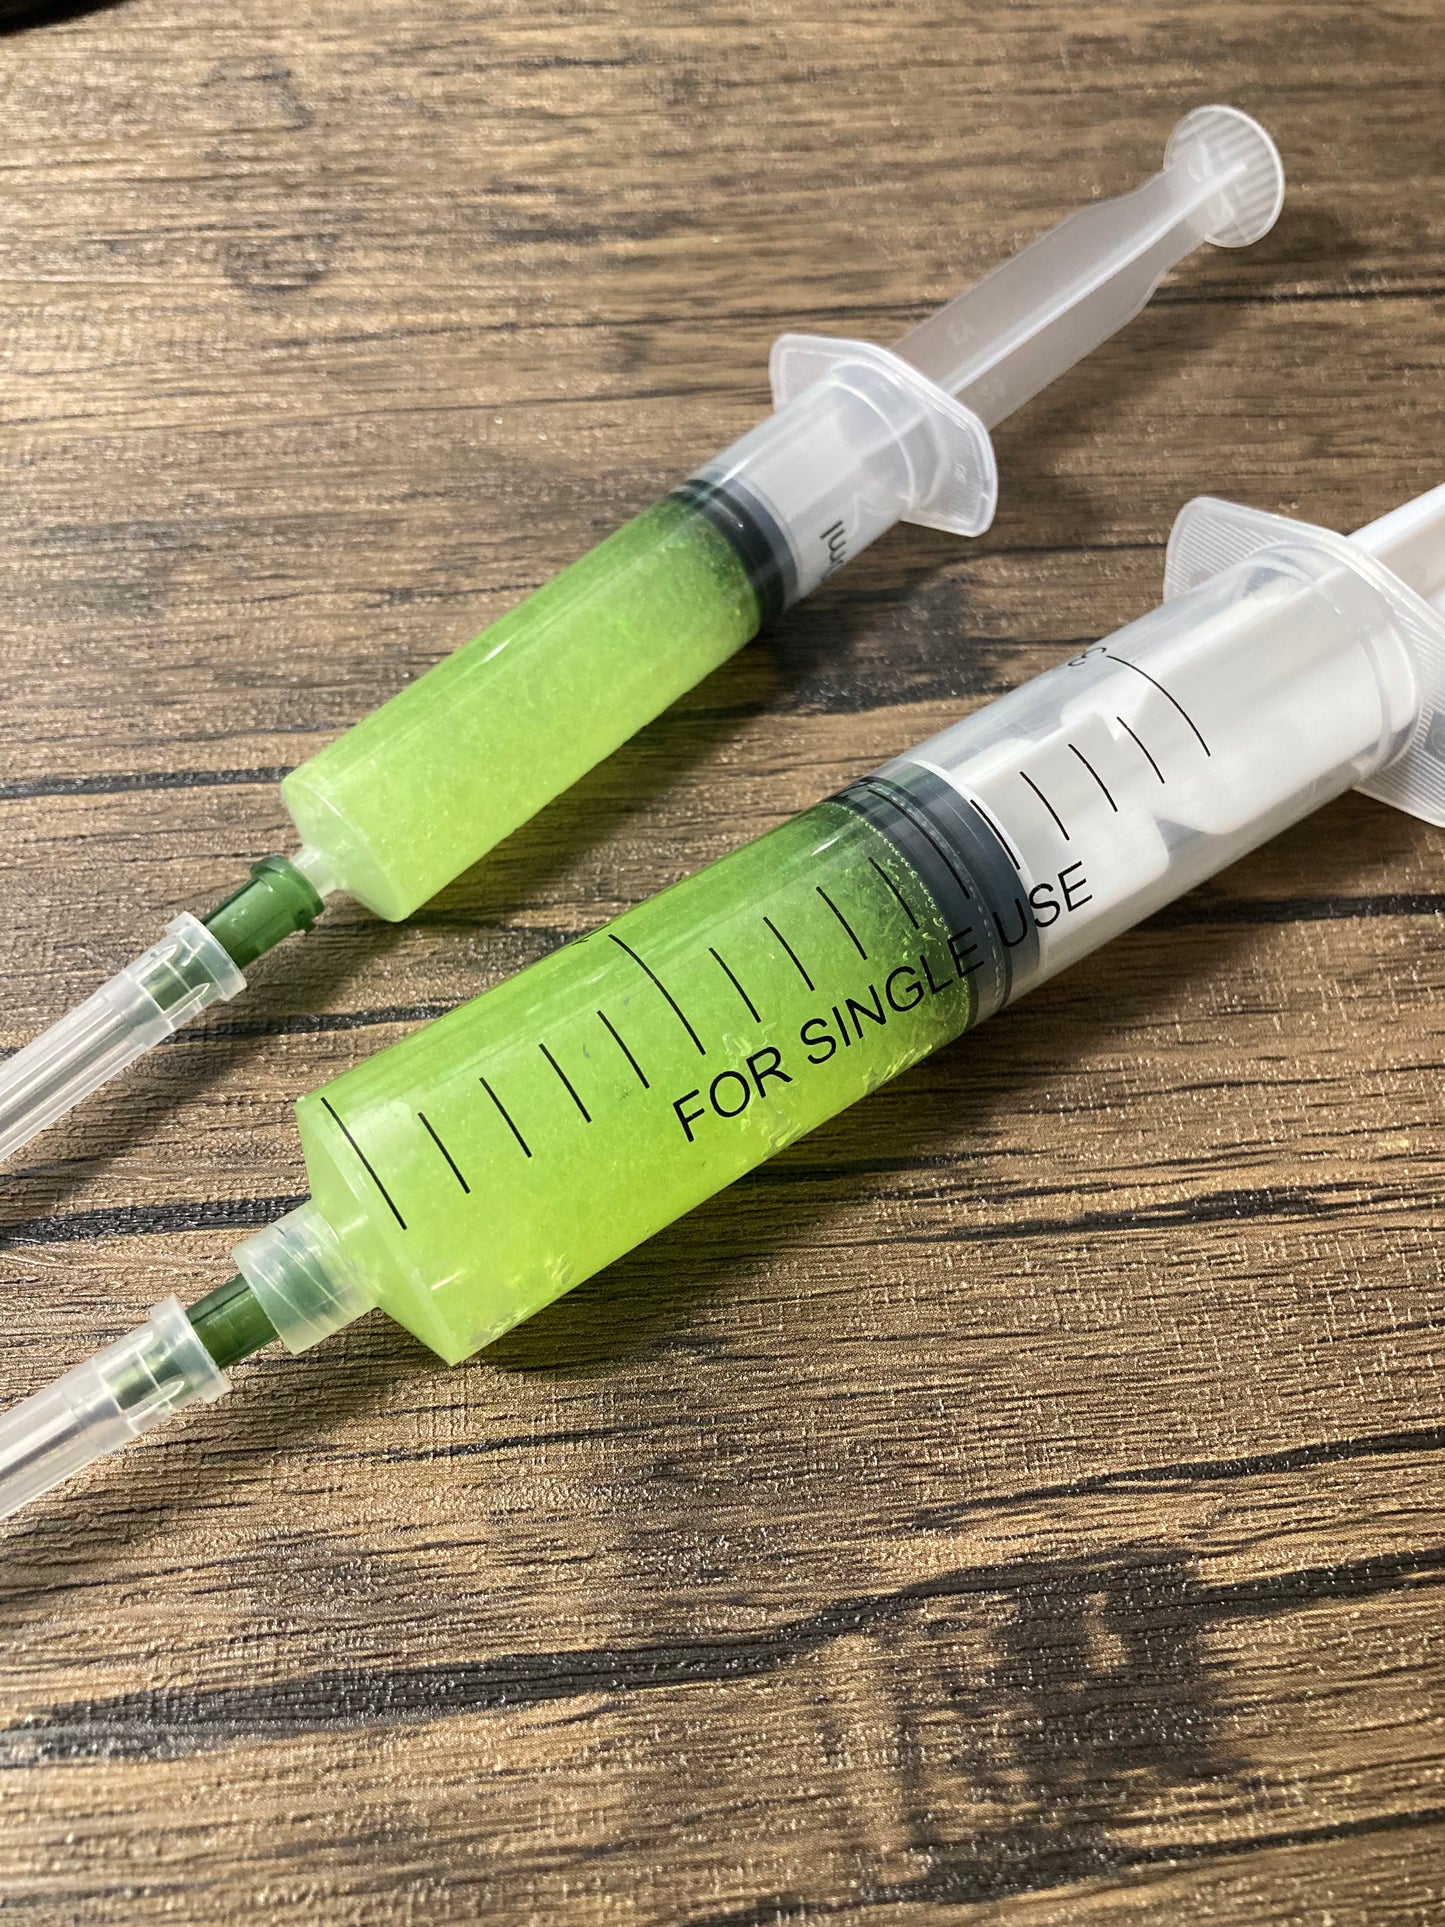 Re-Animator glow in the dark prop/collectible syringe